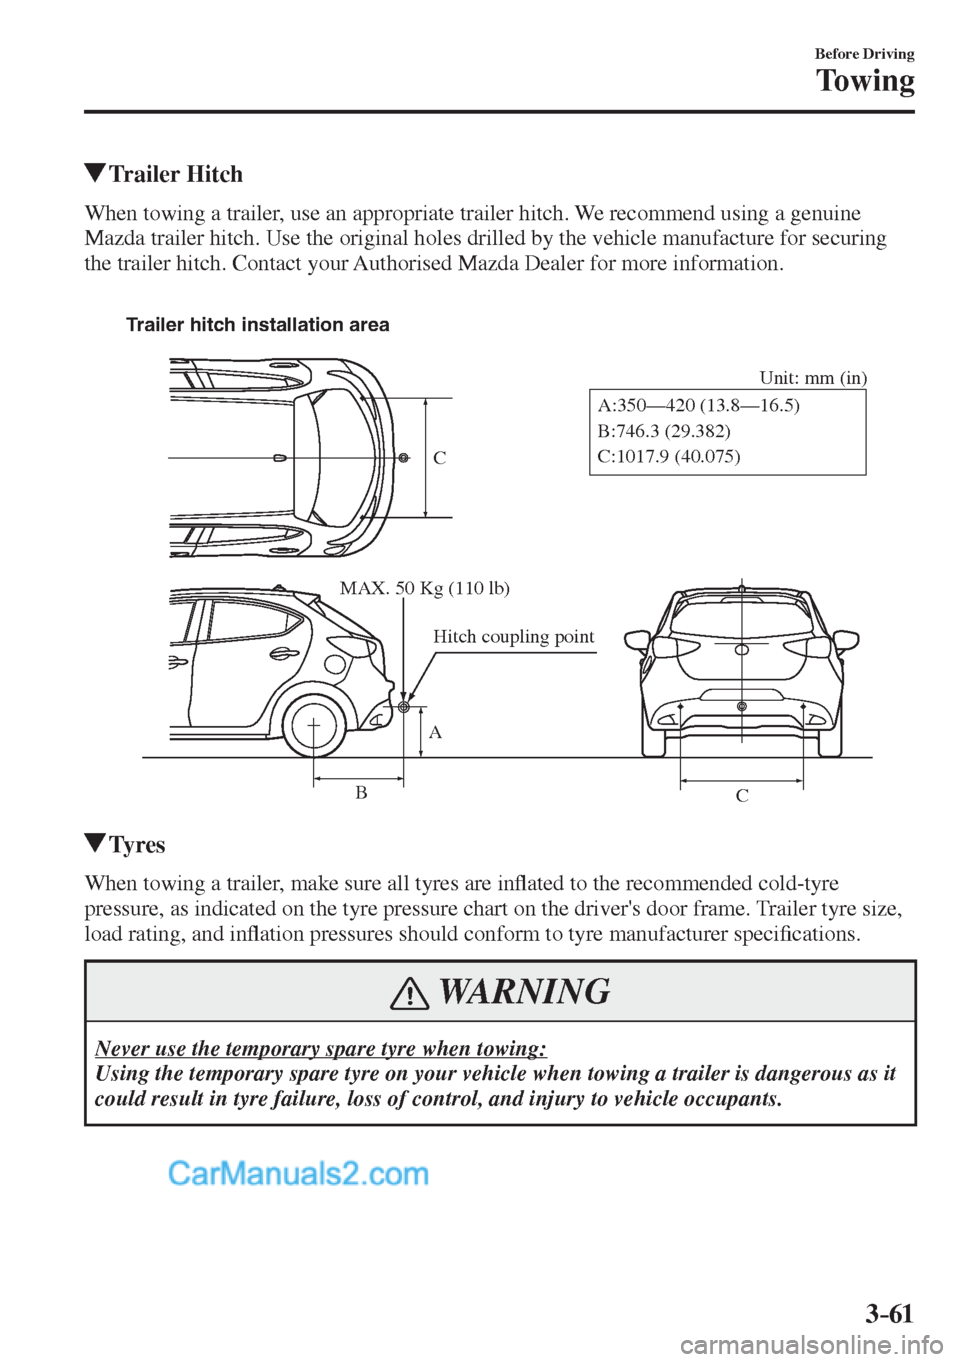 MAZDA MODEL 2 2017  Owners Manual (in English) 3–61
Before Driving
Towing
          Trailer  Hitch
    When towing a trailer, use an appropriate trailer hitch. We recommend using a genuine 
Mazda trailer hitch. Use the original holes drilled by 